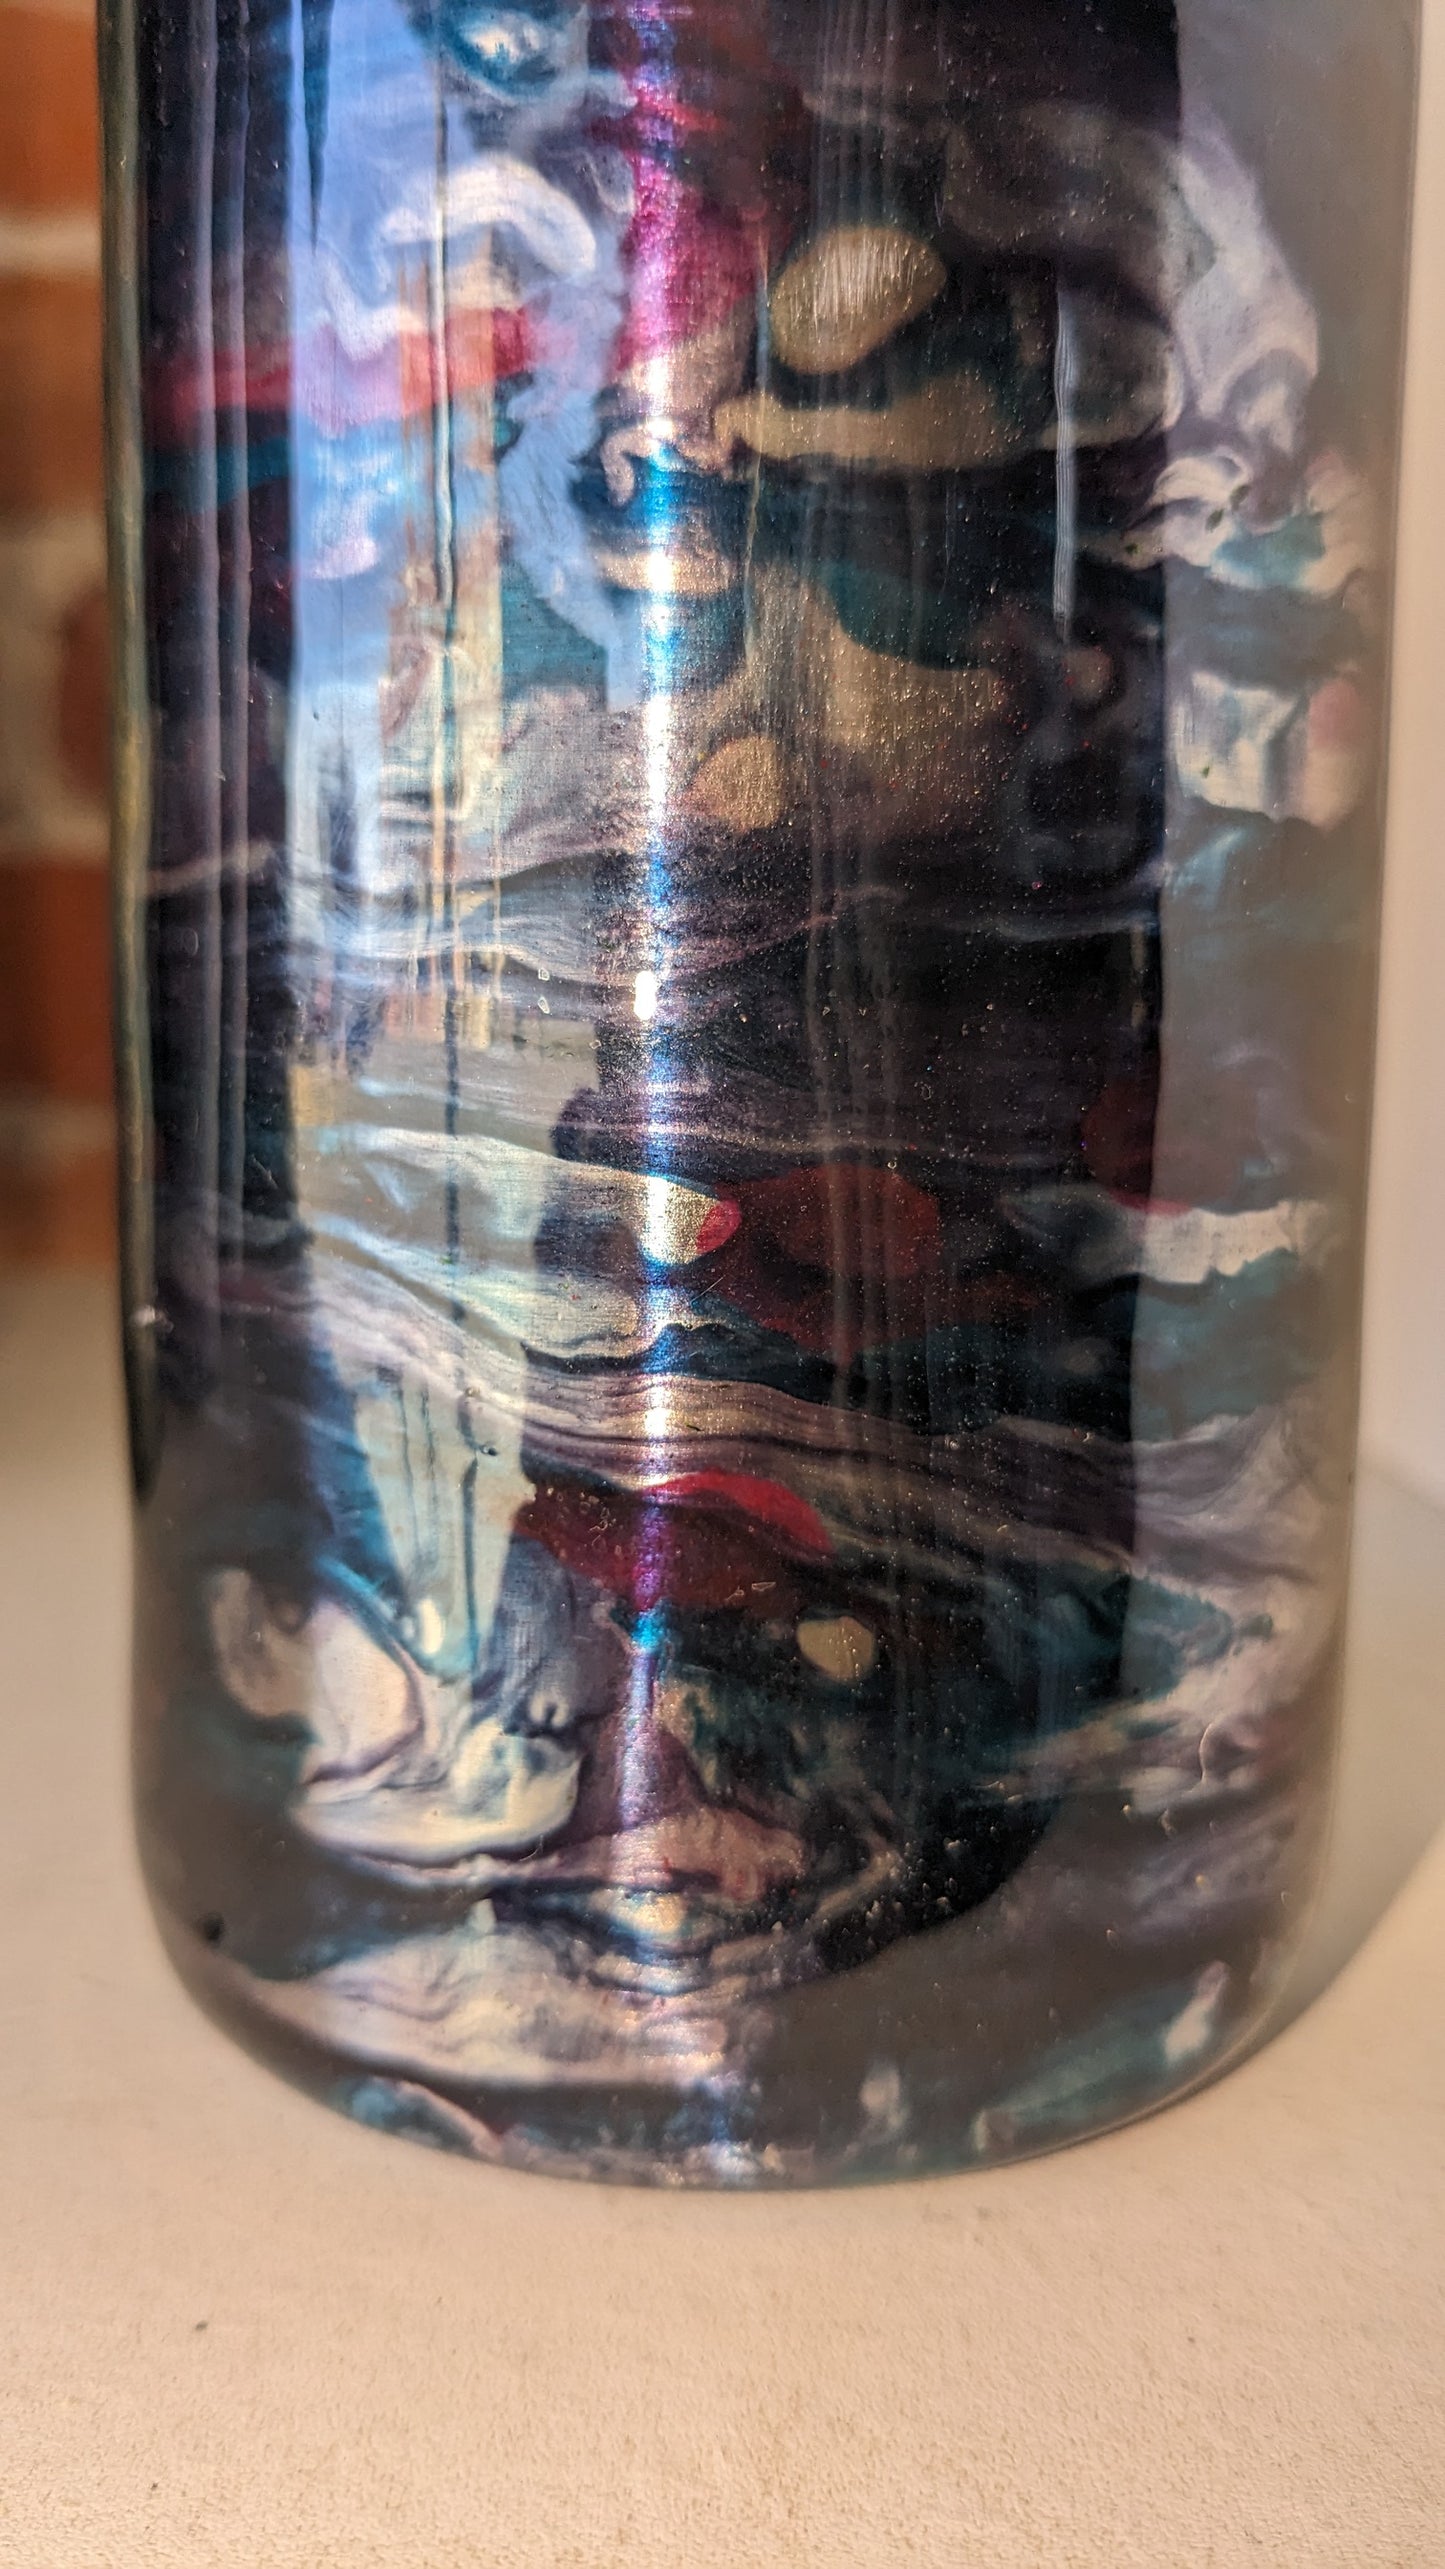 20 ounce stainless steel, Insulated, alcohol ink art Tumbler